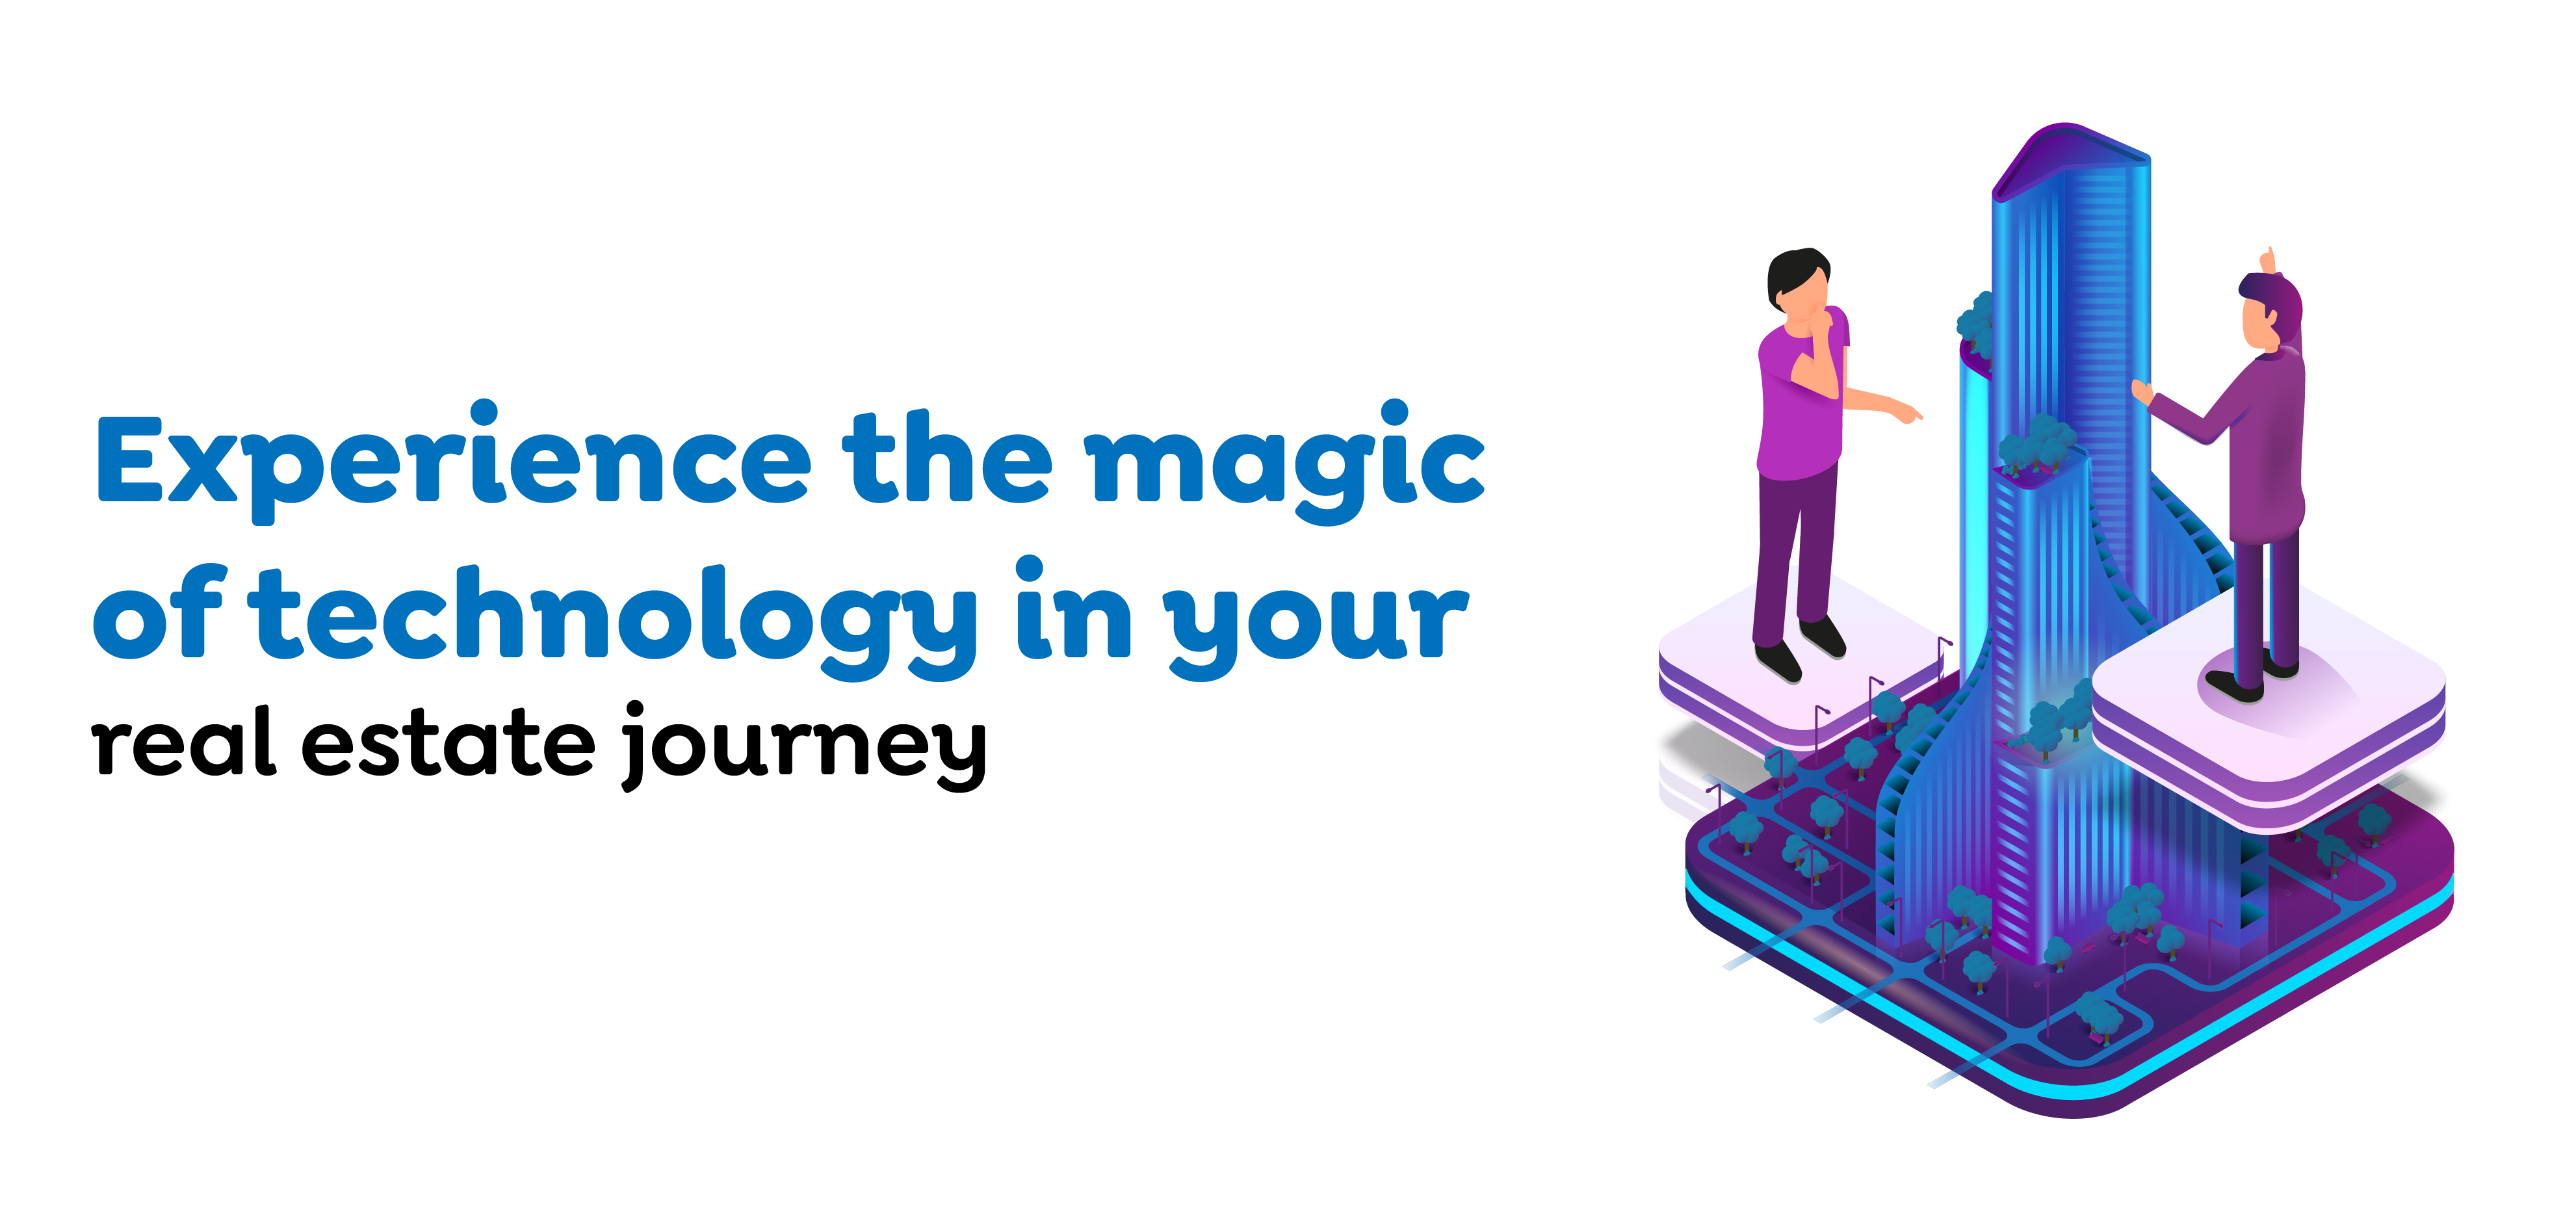 Experience the magic of technology in your real estate journey